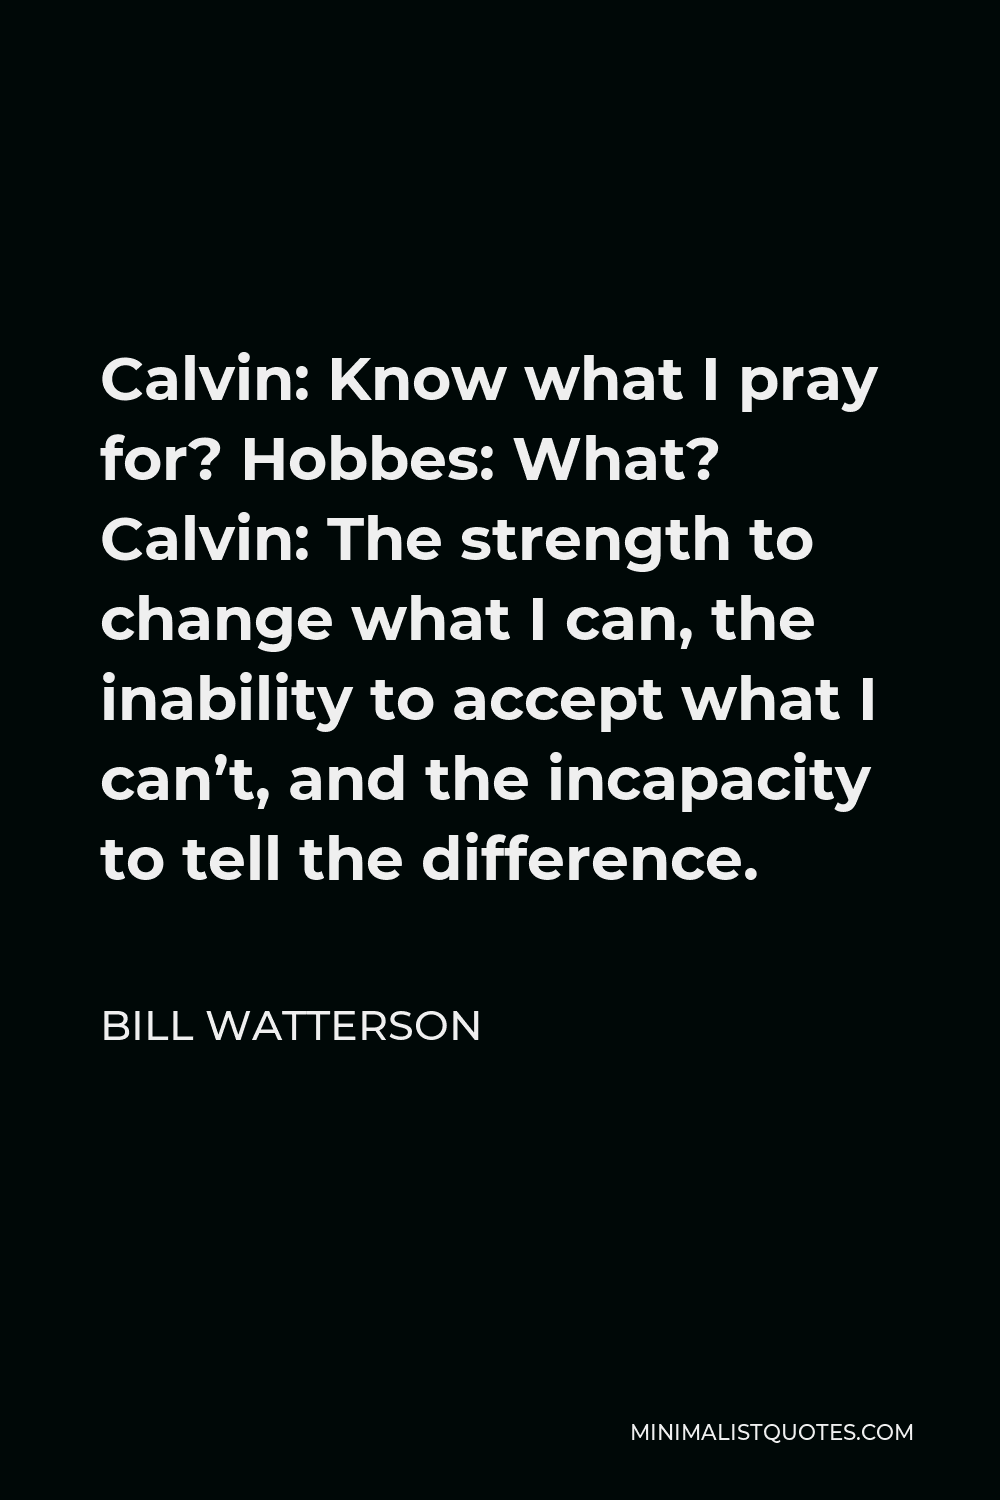 Bill Watterson Quote - Calvin: Know what I pray for? Hobbes: What? Calvin: The strength to change what I can, the inability to accept what I can’t, and the incapacity to tell the difference.